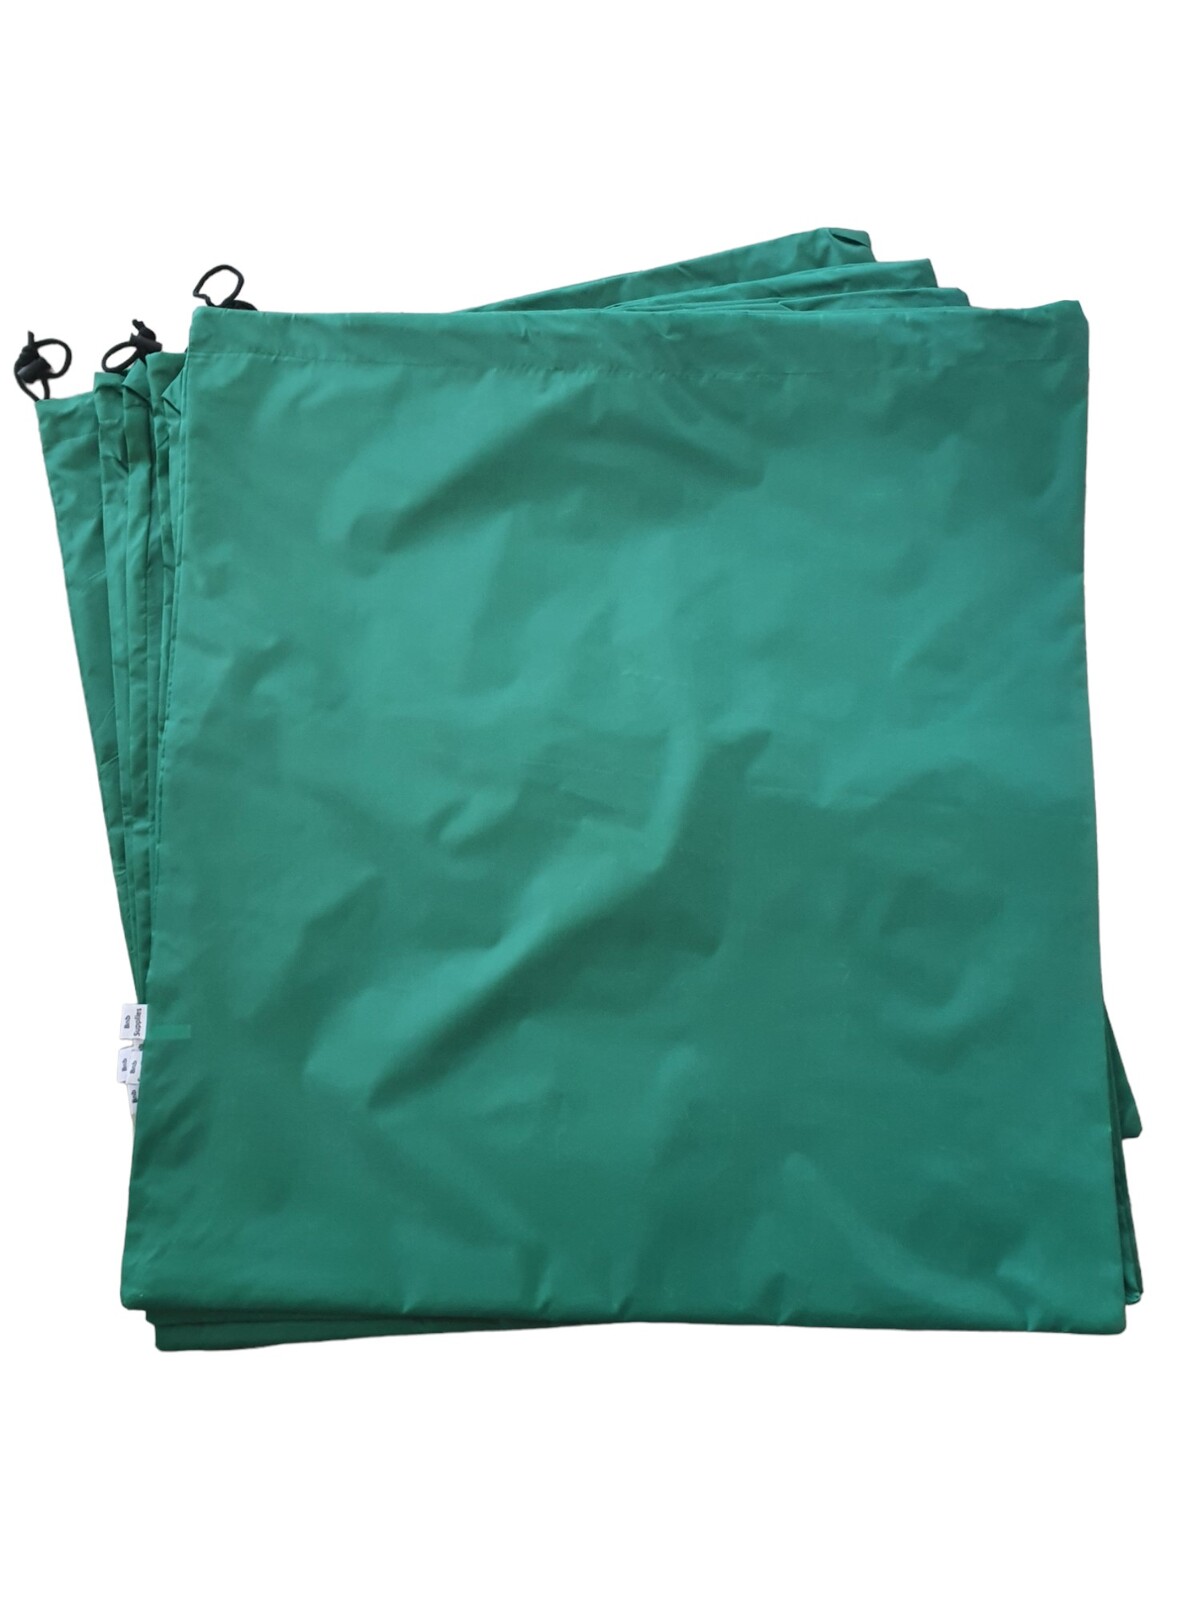 Laundry Bag 30x33  Gompels  Care  Nursery Supply Specialists